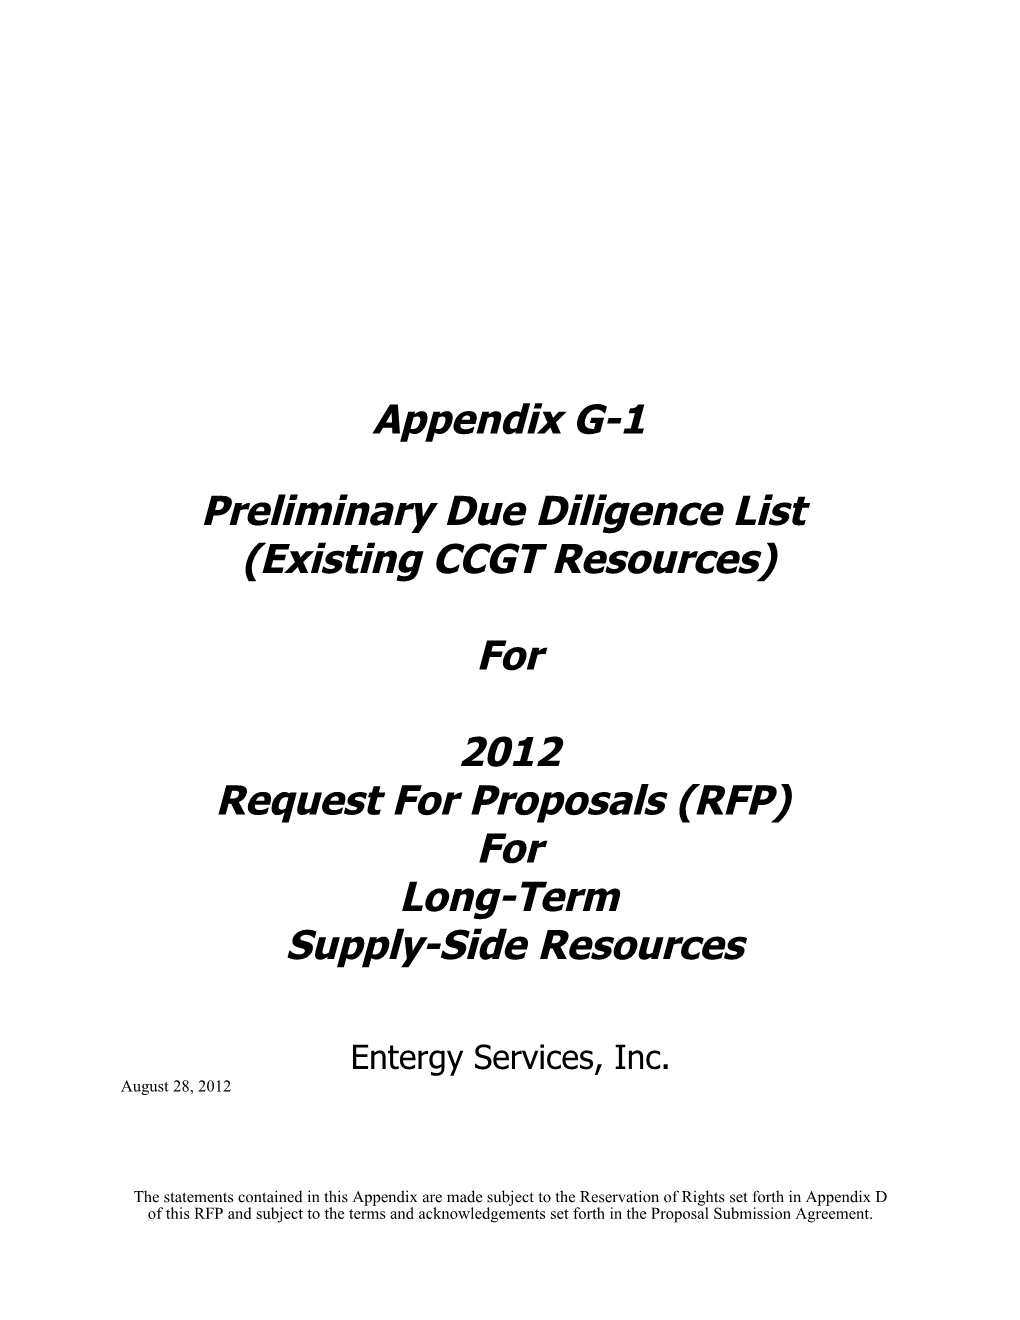 Preliminary Due Diligence List (Existing CCGT Resources)